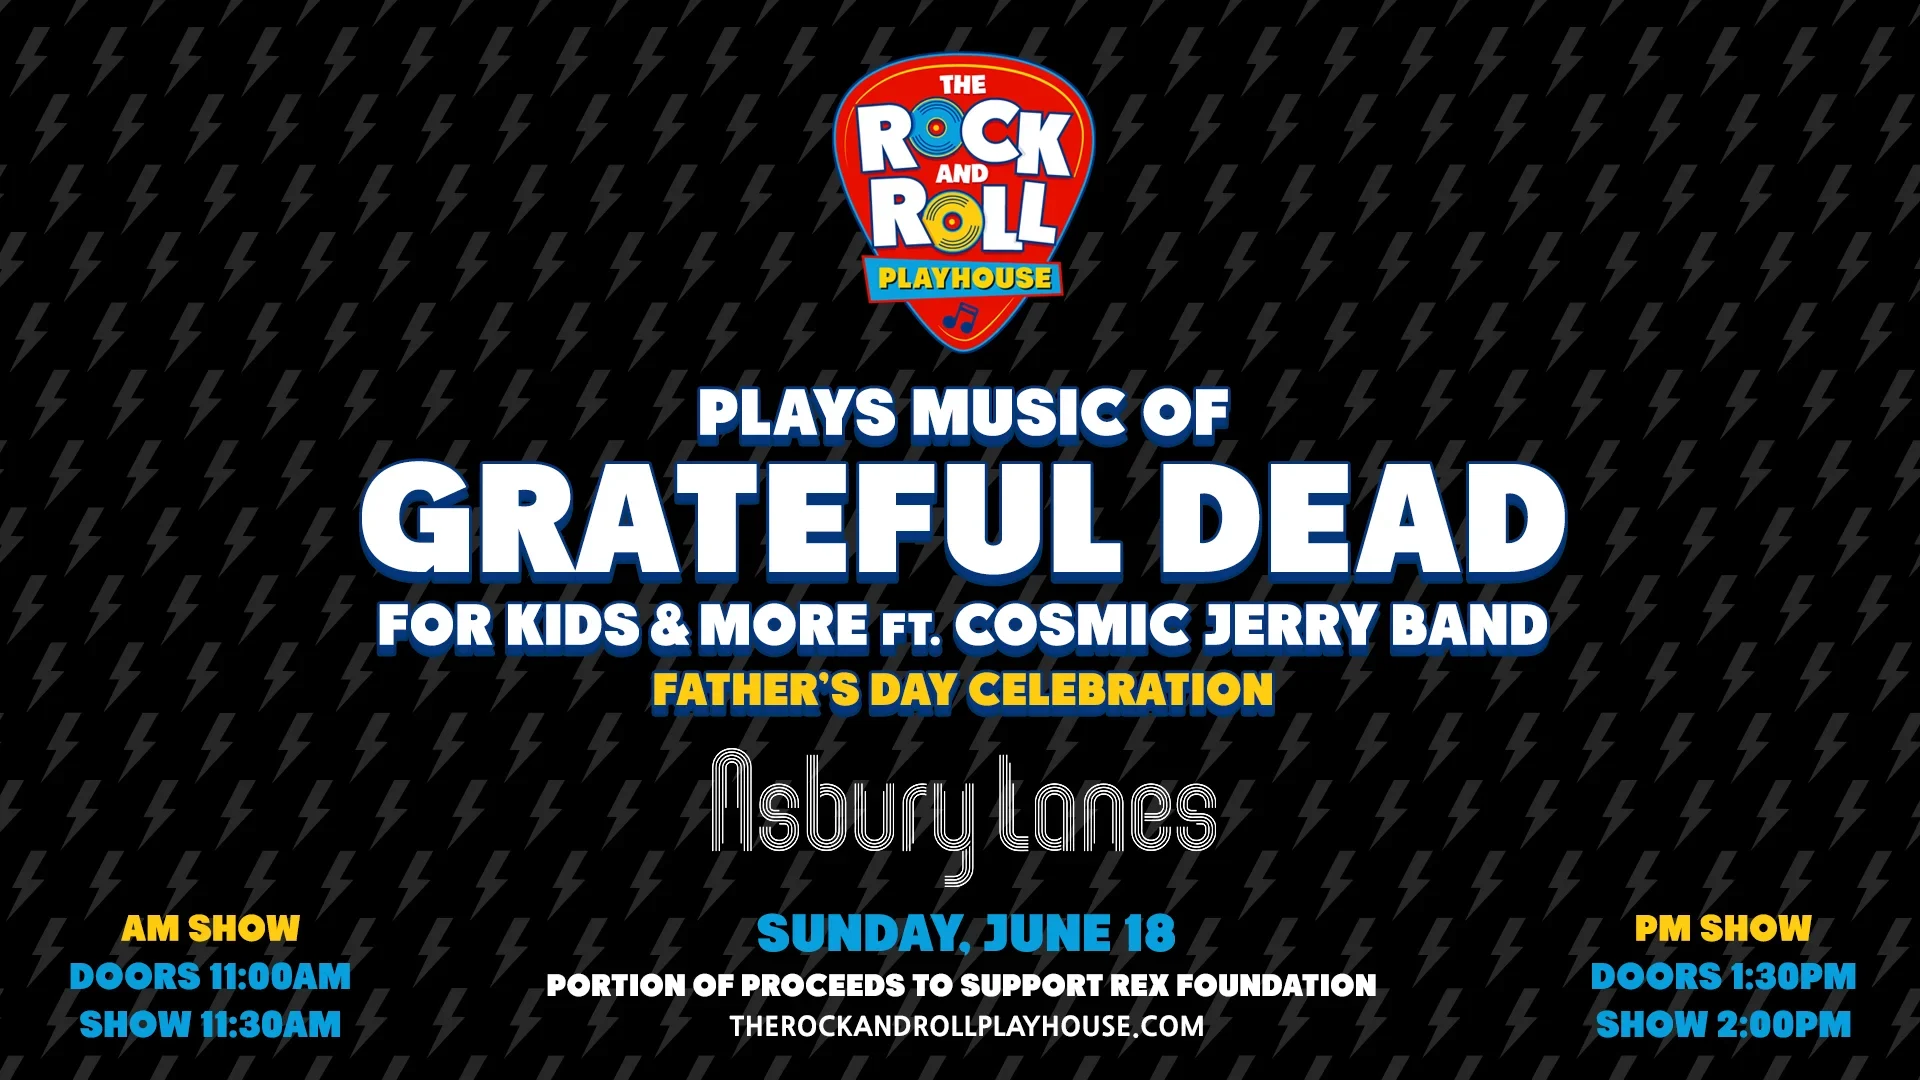 Rock N Roll Playhouse: Plays Music of the Grateful Dead